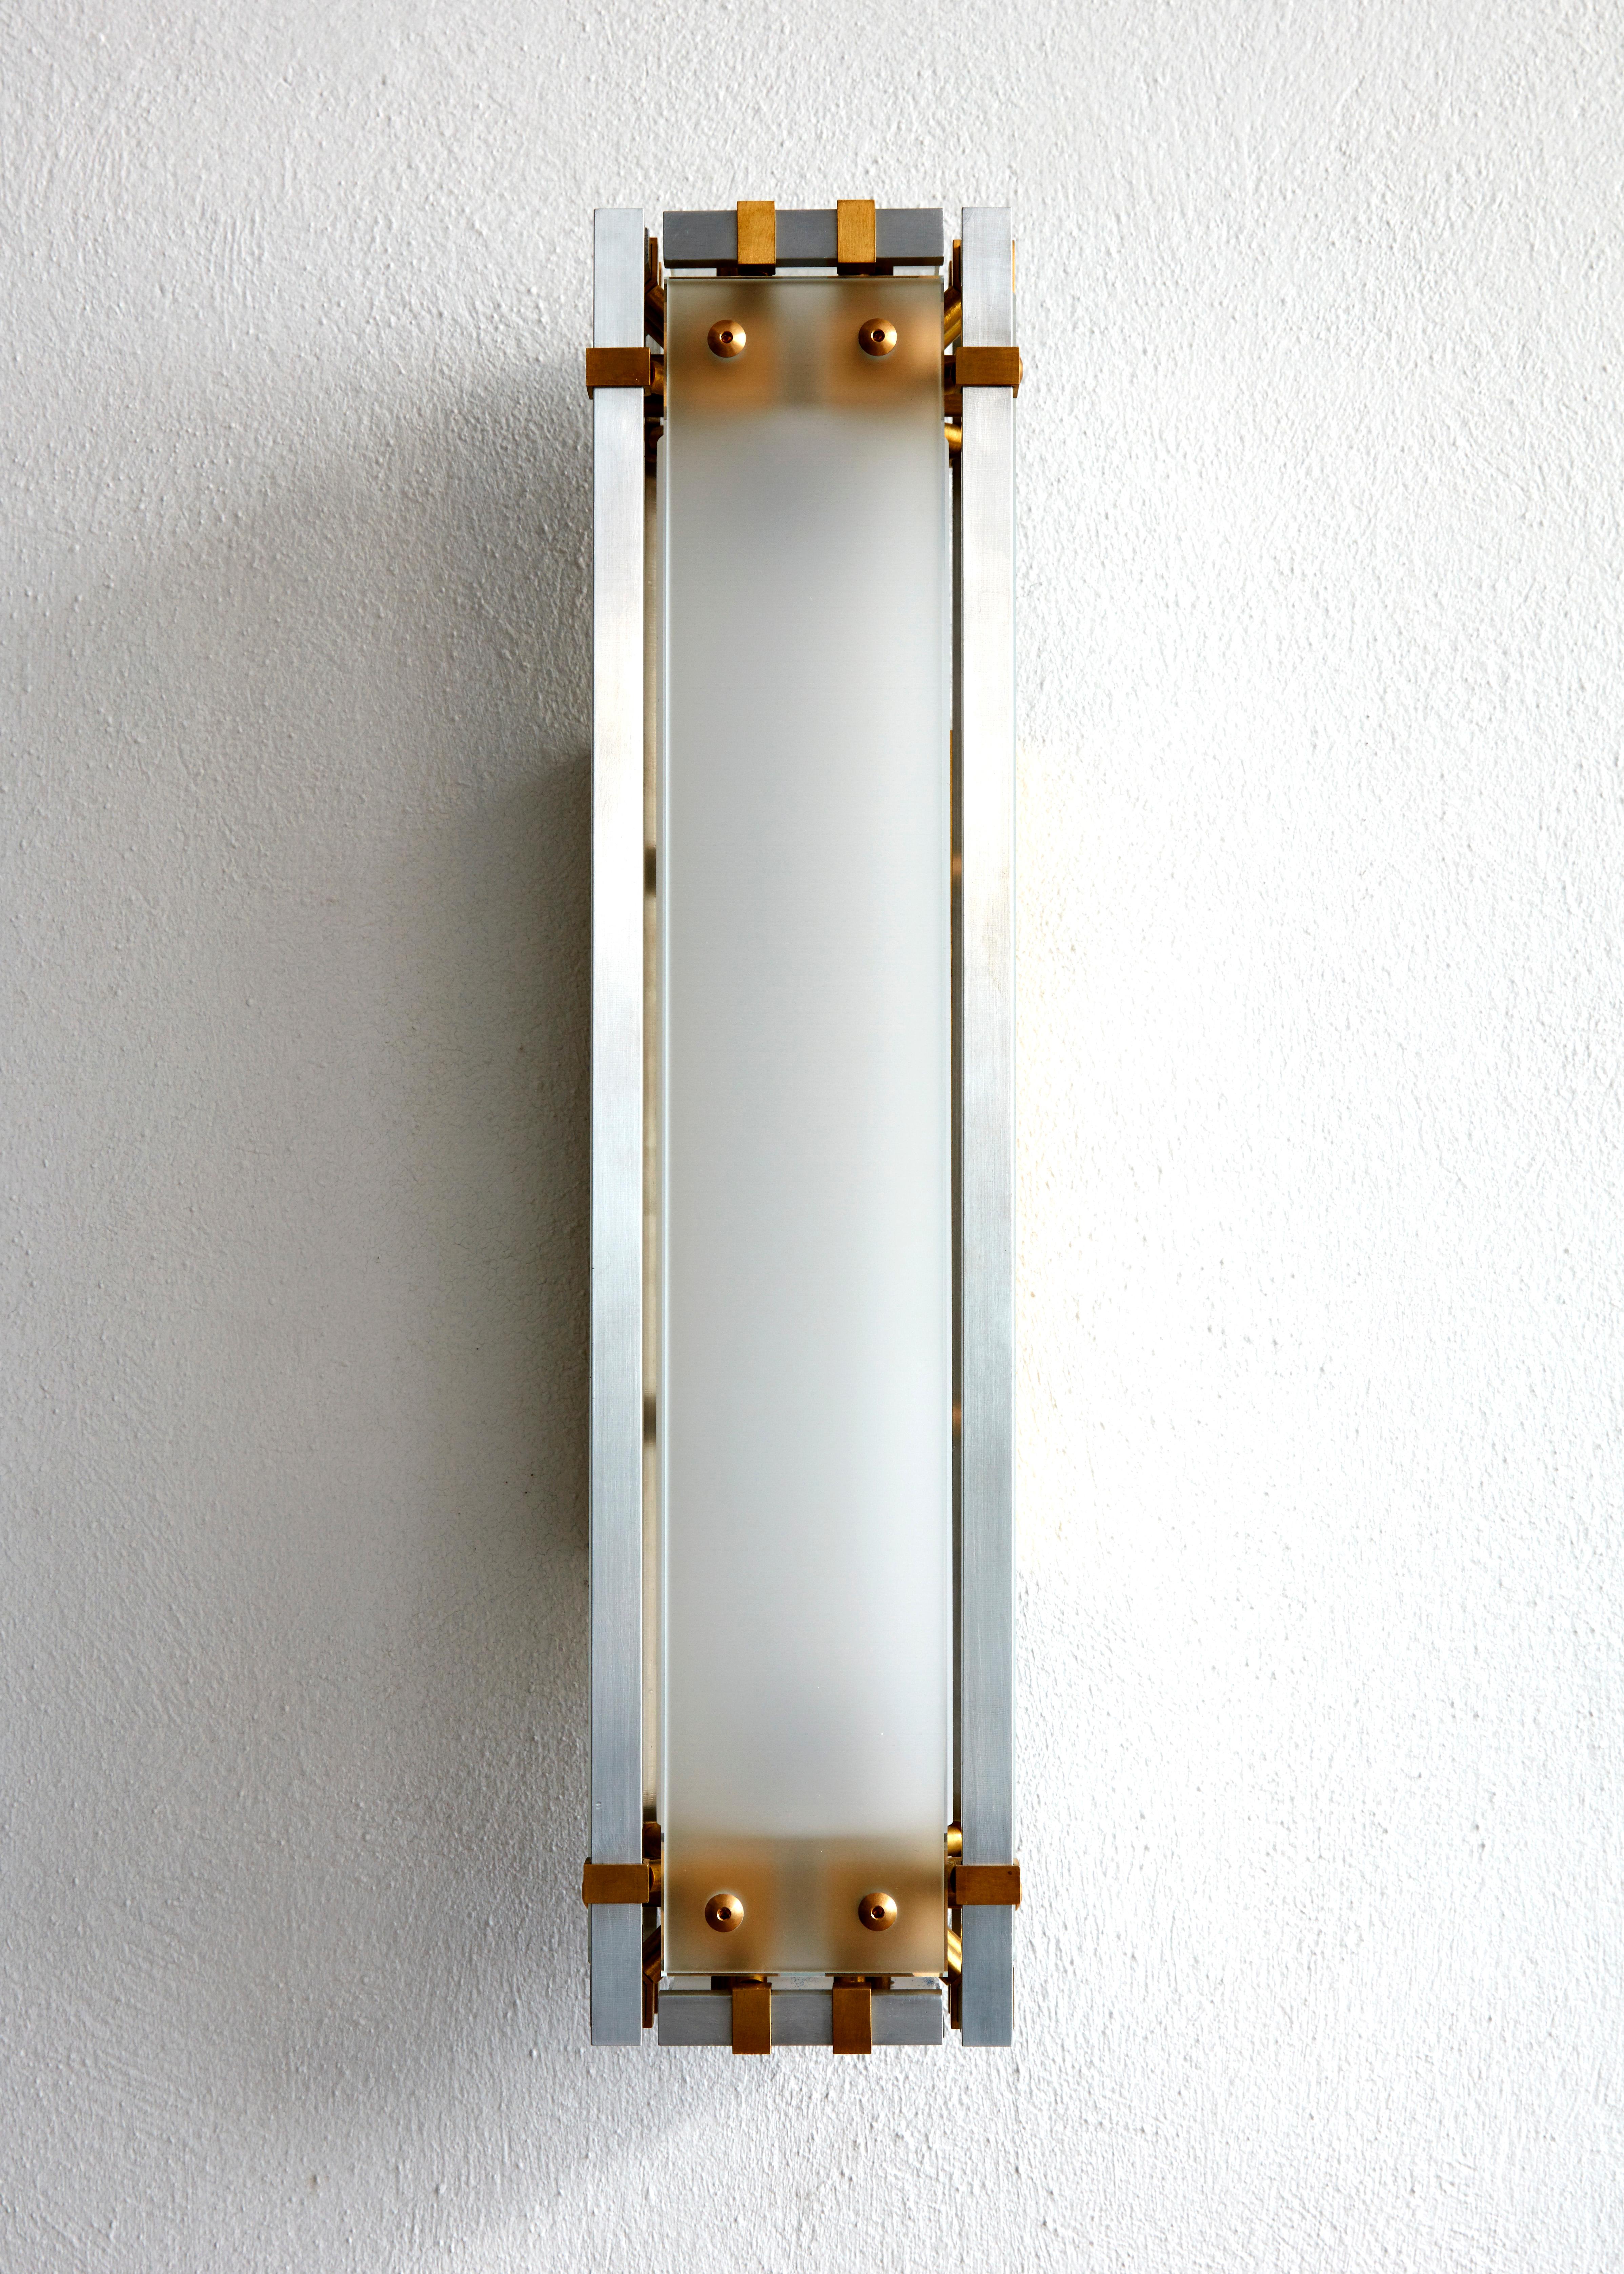 American Joinery Wall Sconce by Billy Cotton in Aluminum, Brass and Acid-Etched Glass For Sale